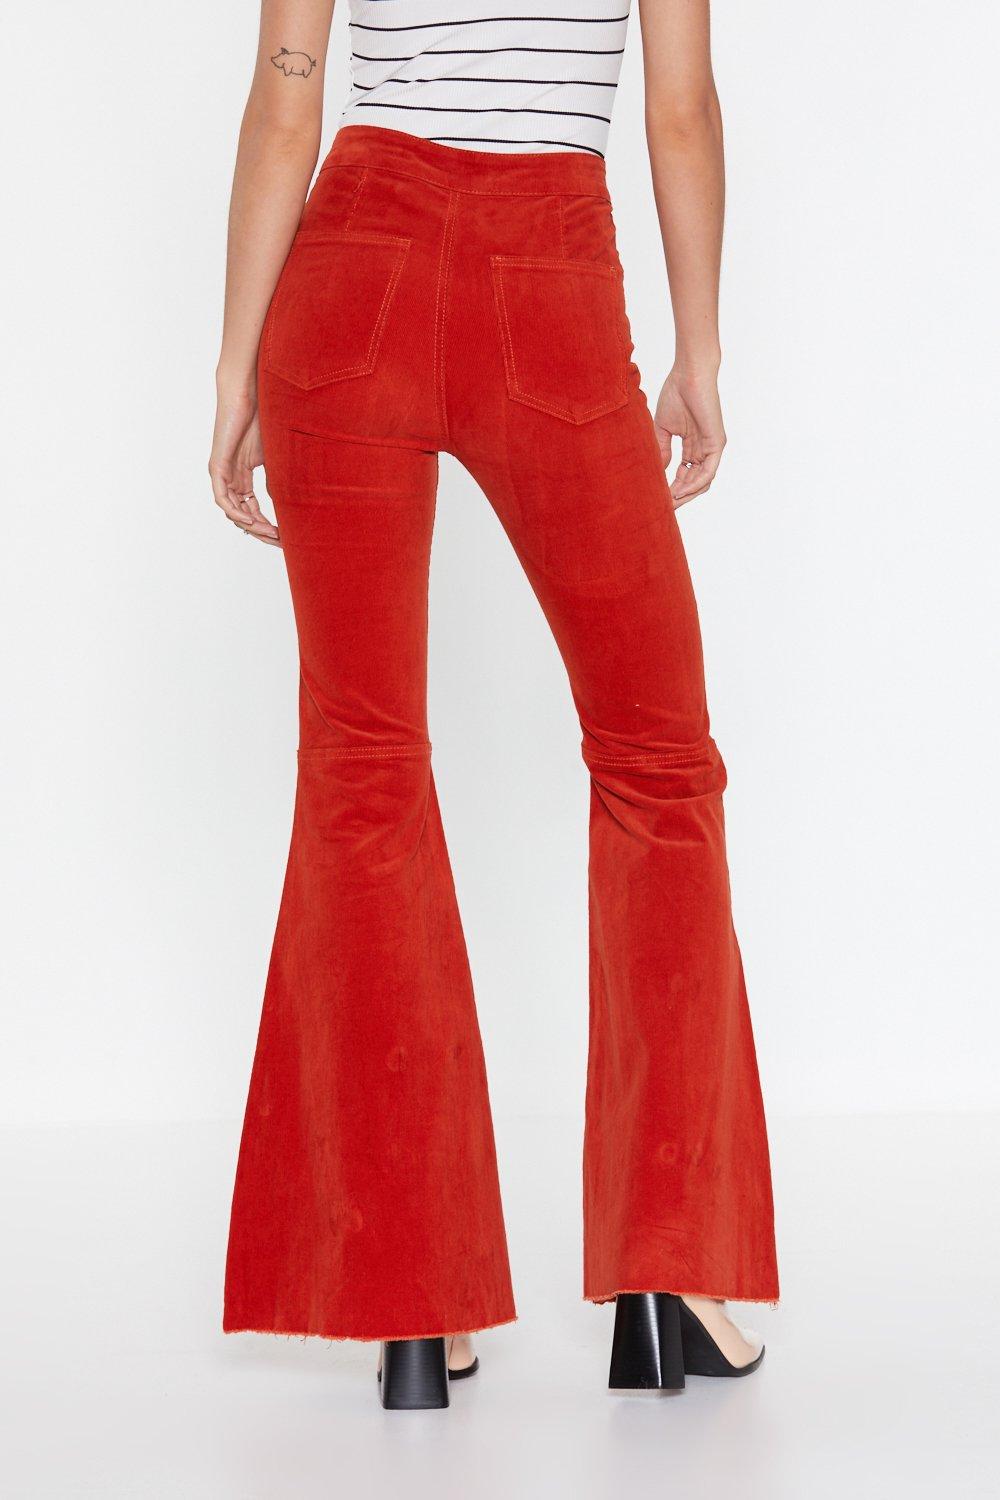 red flare jeans